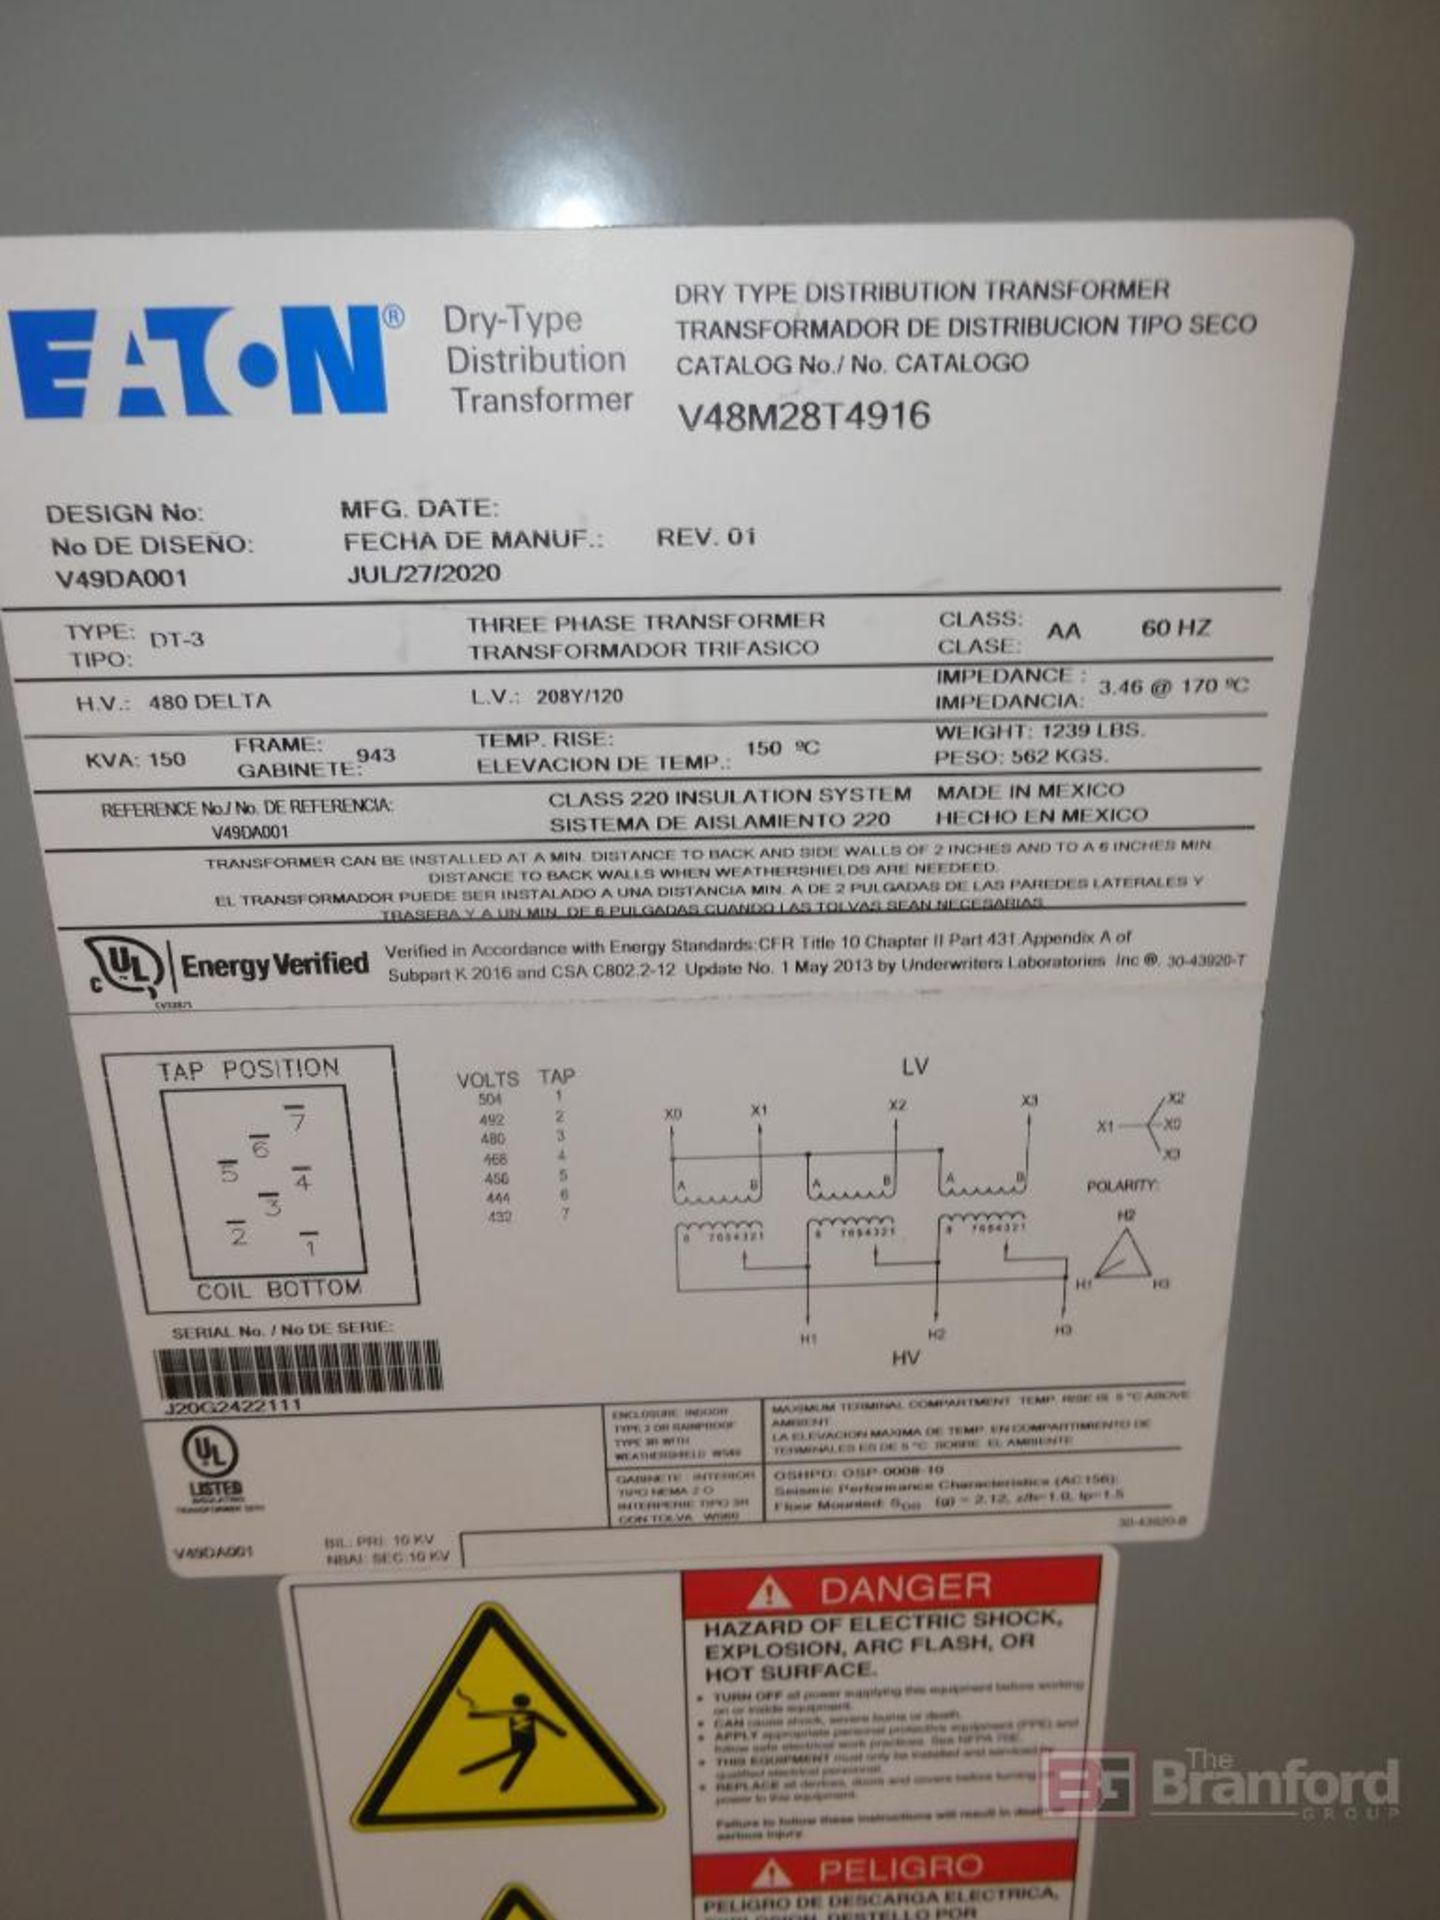 2020 Eaton Electrical Panels and Type DT-3 Transformer - Image 2 of 4